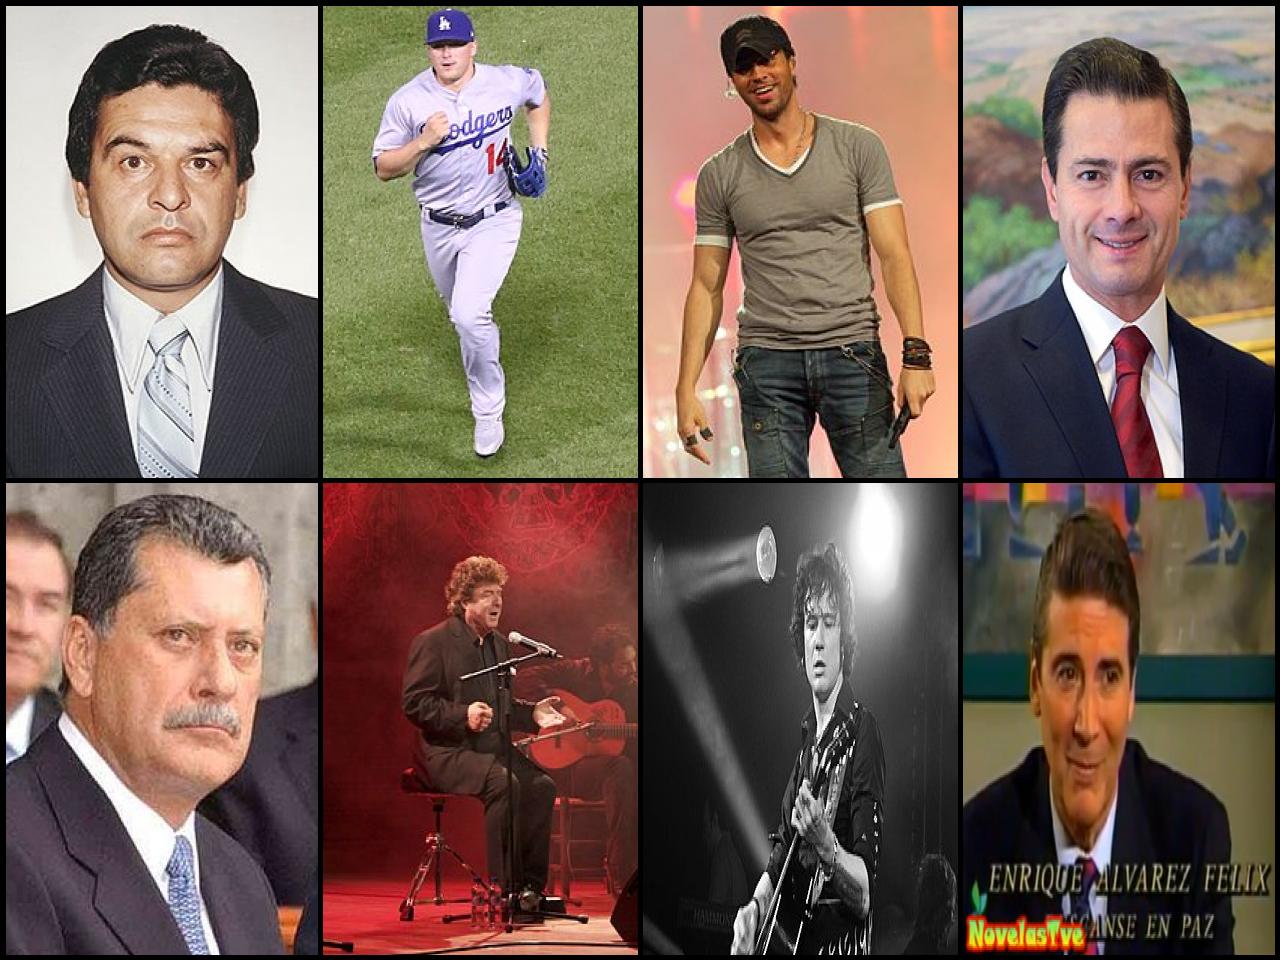 Famous People with name Enrique